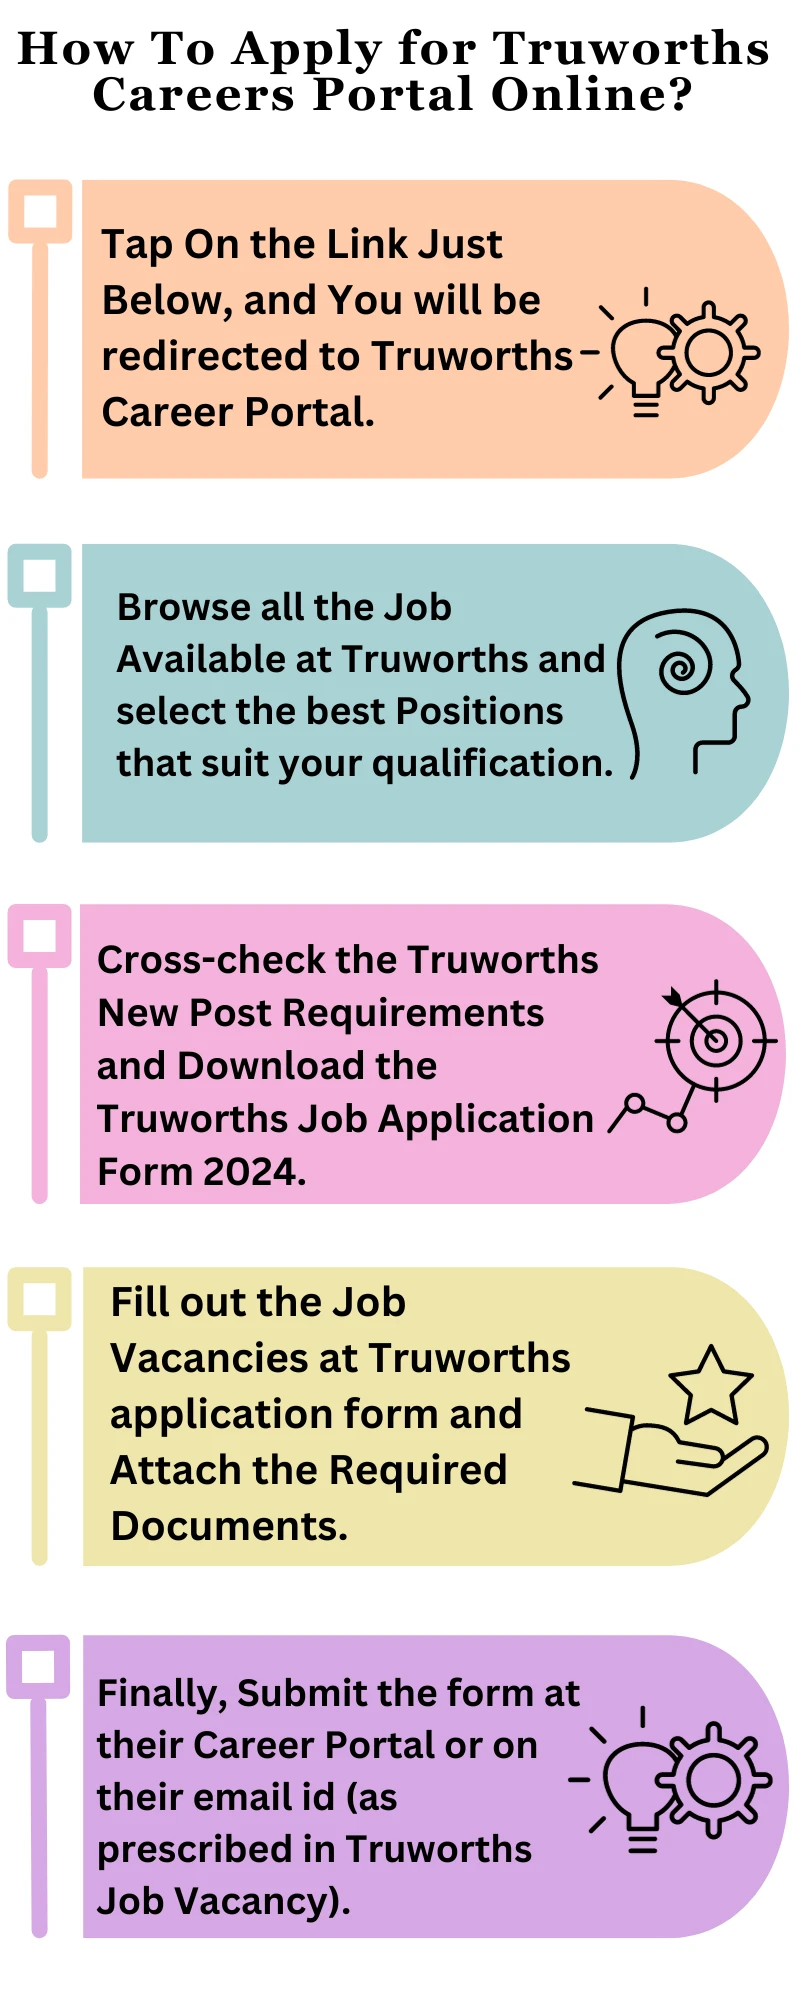 How To Apply for Truworths Careers Portal Online?